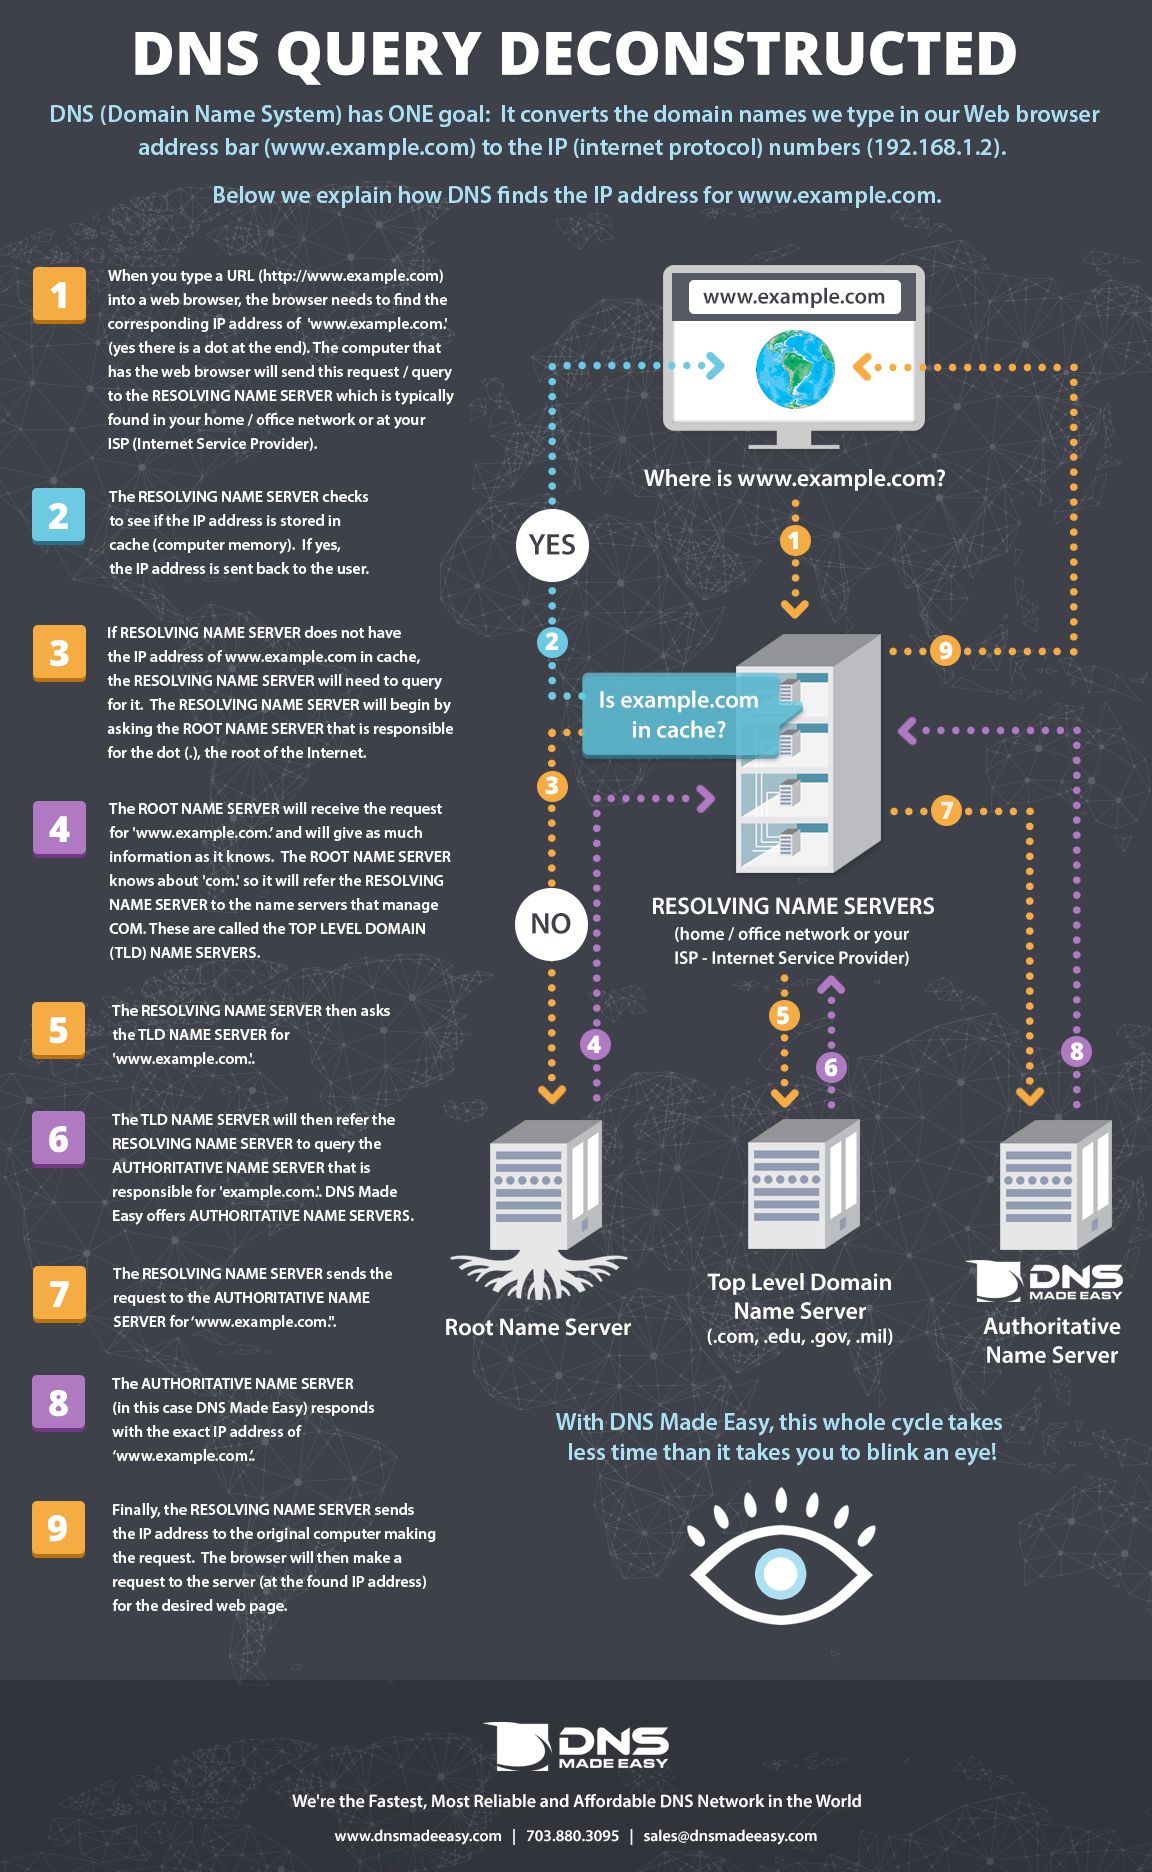 How does DNS work? DNS Quesy Deconstructed - Infographic